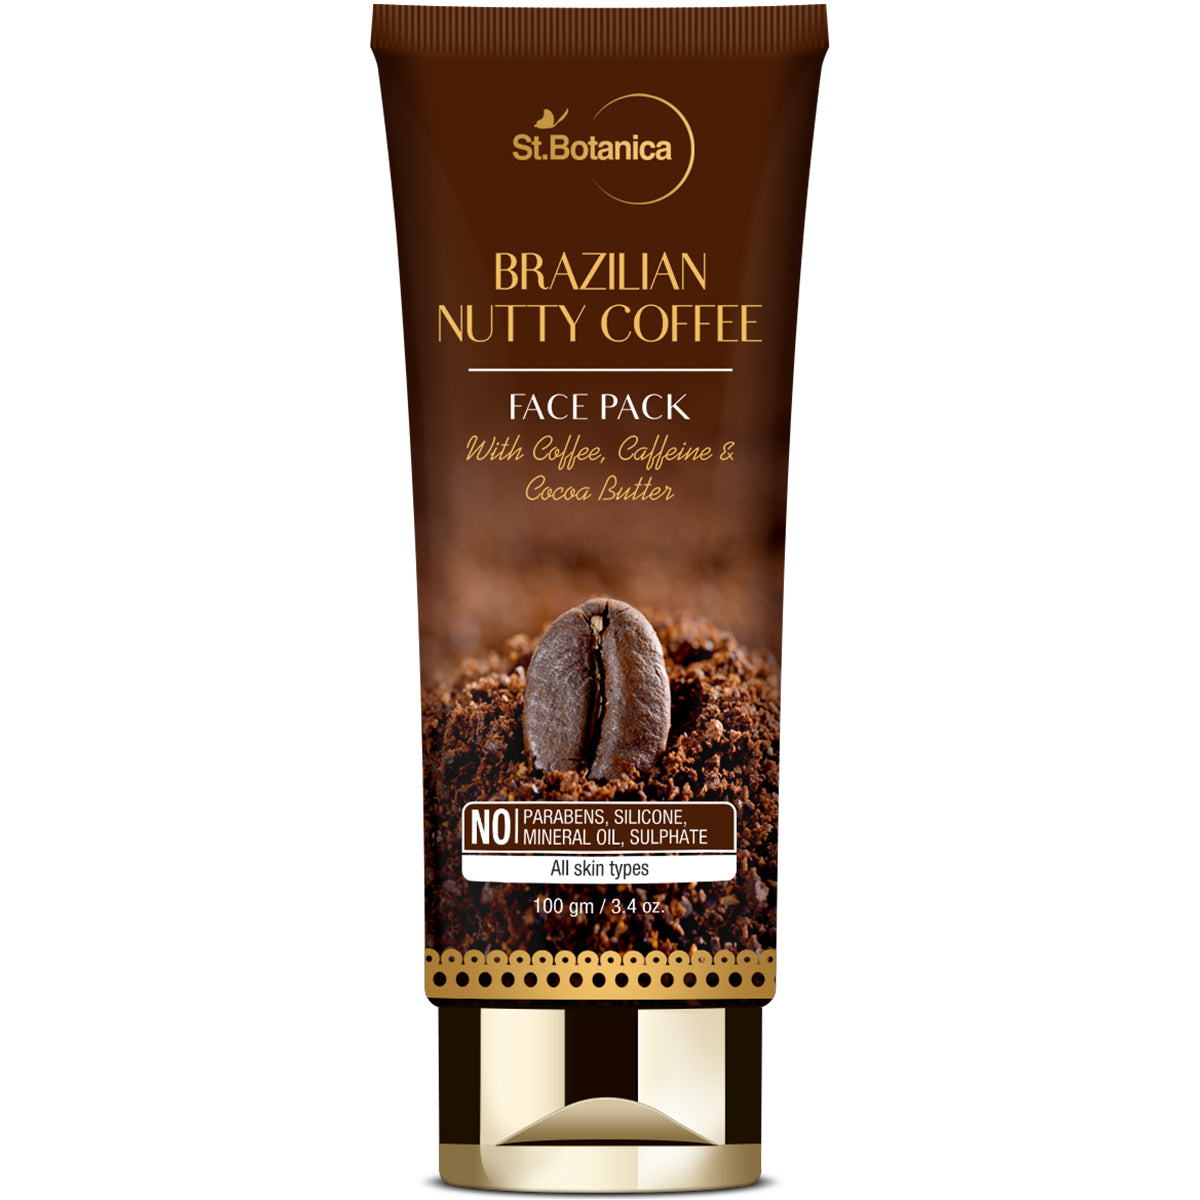 St.Botanica Brazilian Nutty Coffee Face Mask with Coffee, Caffeine and Cocoa Butter No Sls, Paraben for Hyperpigmentation and dark spots, 100 ml